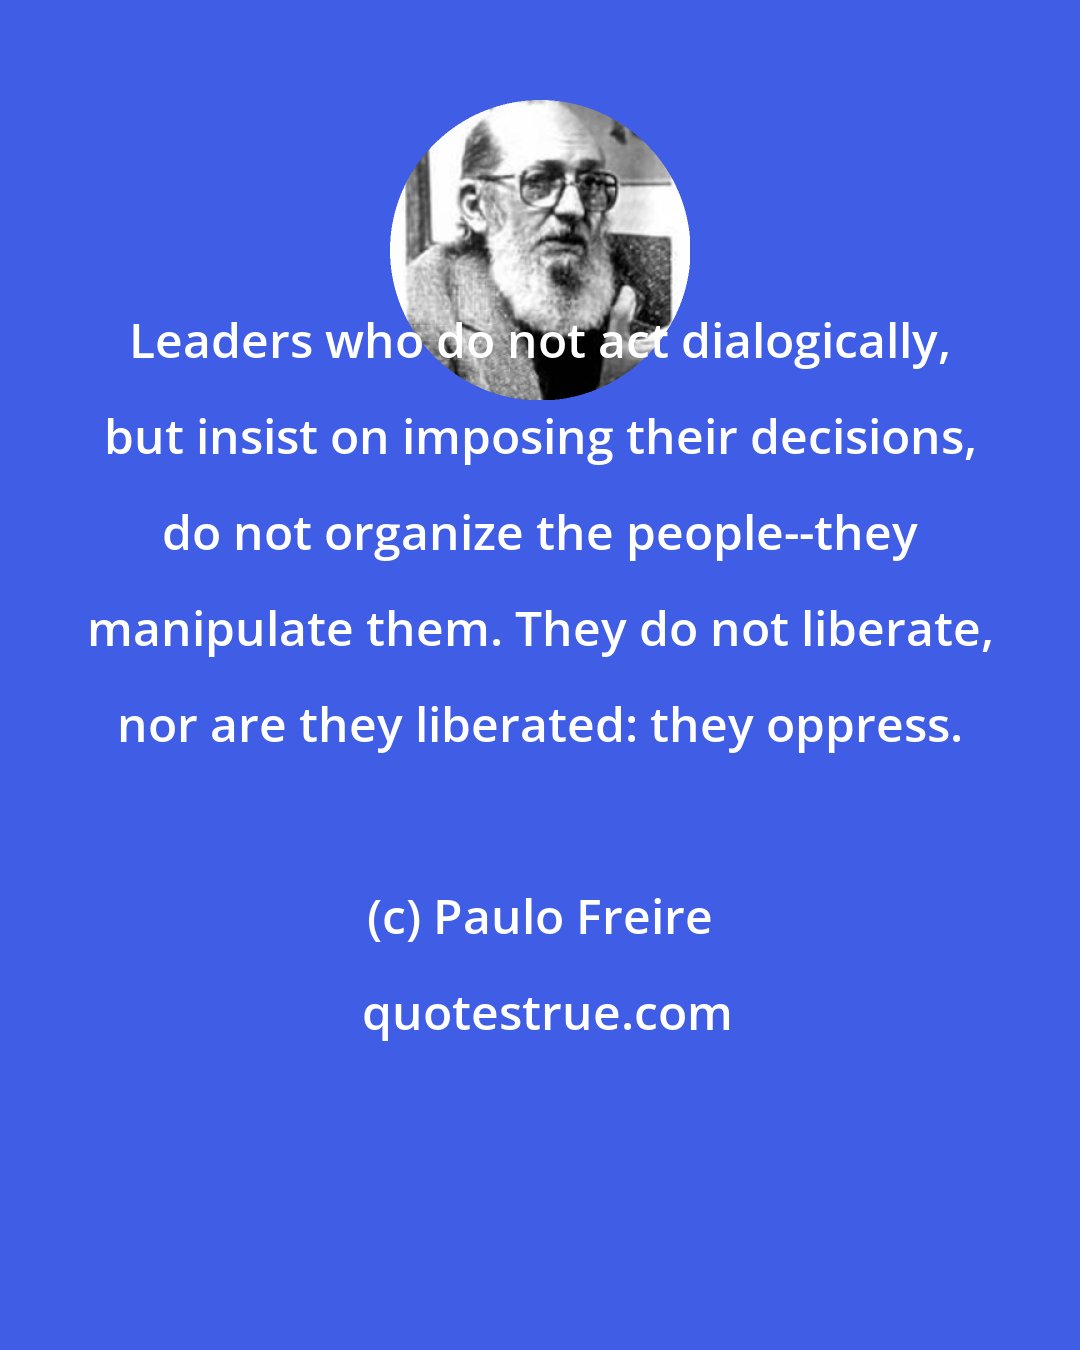 Paulo Freire: Leaders who do not act dialogically, but insist on imposing their decisions, do not organize the people--they manipulate them. They do not liberate, nor are they liberated: they oppress.